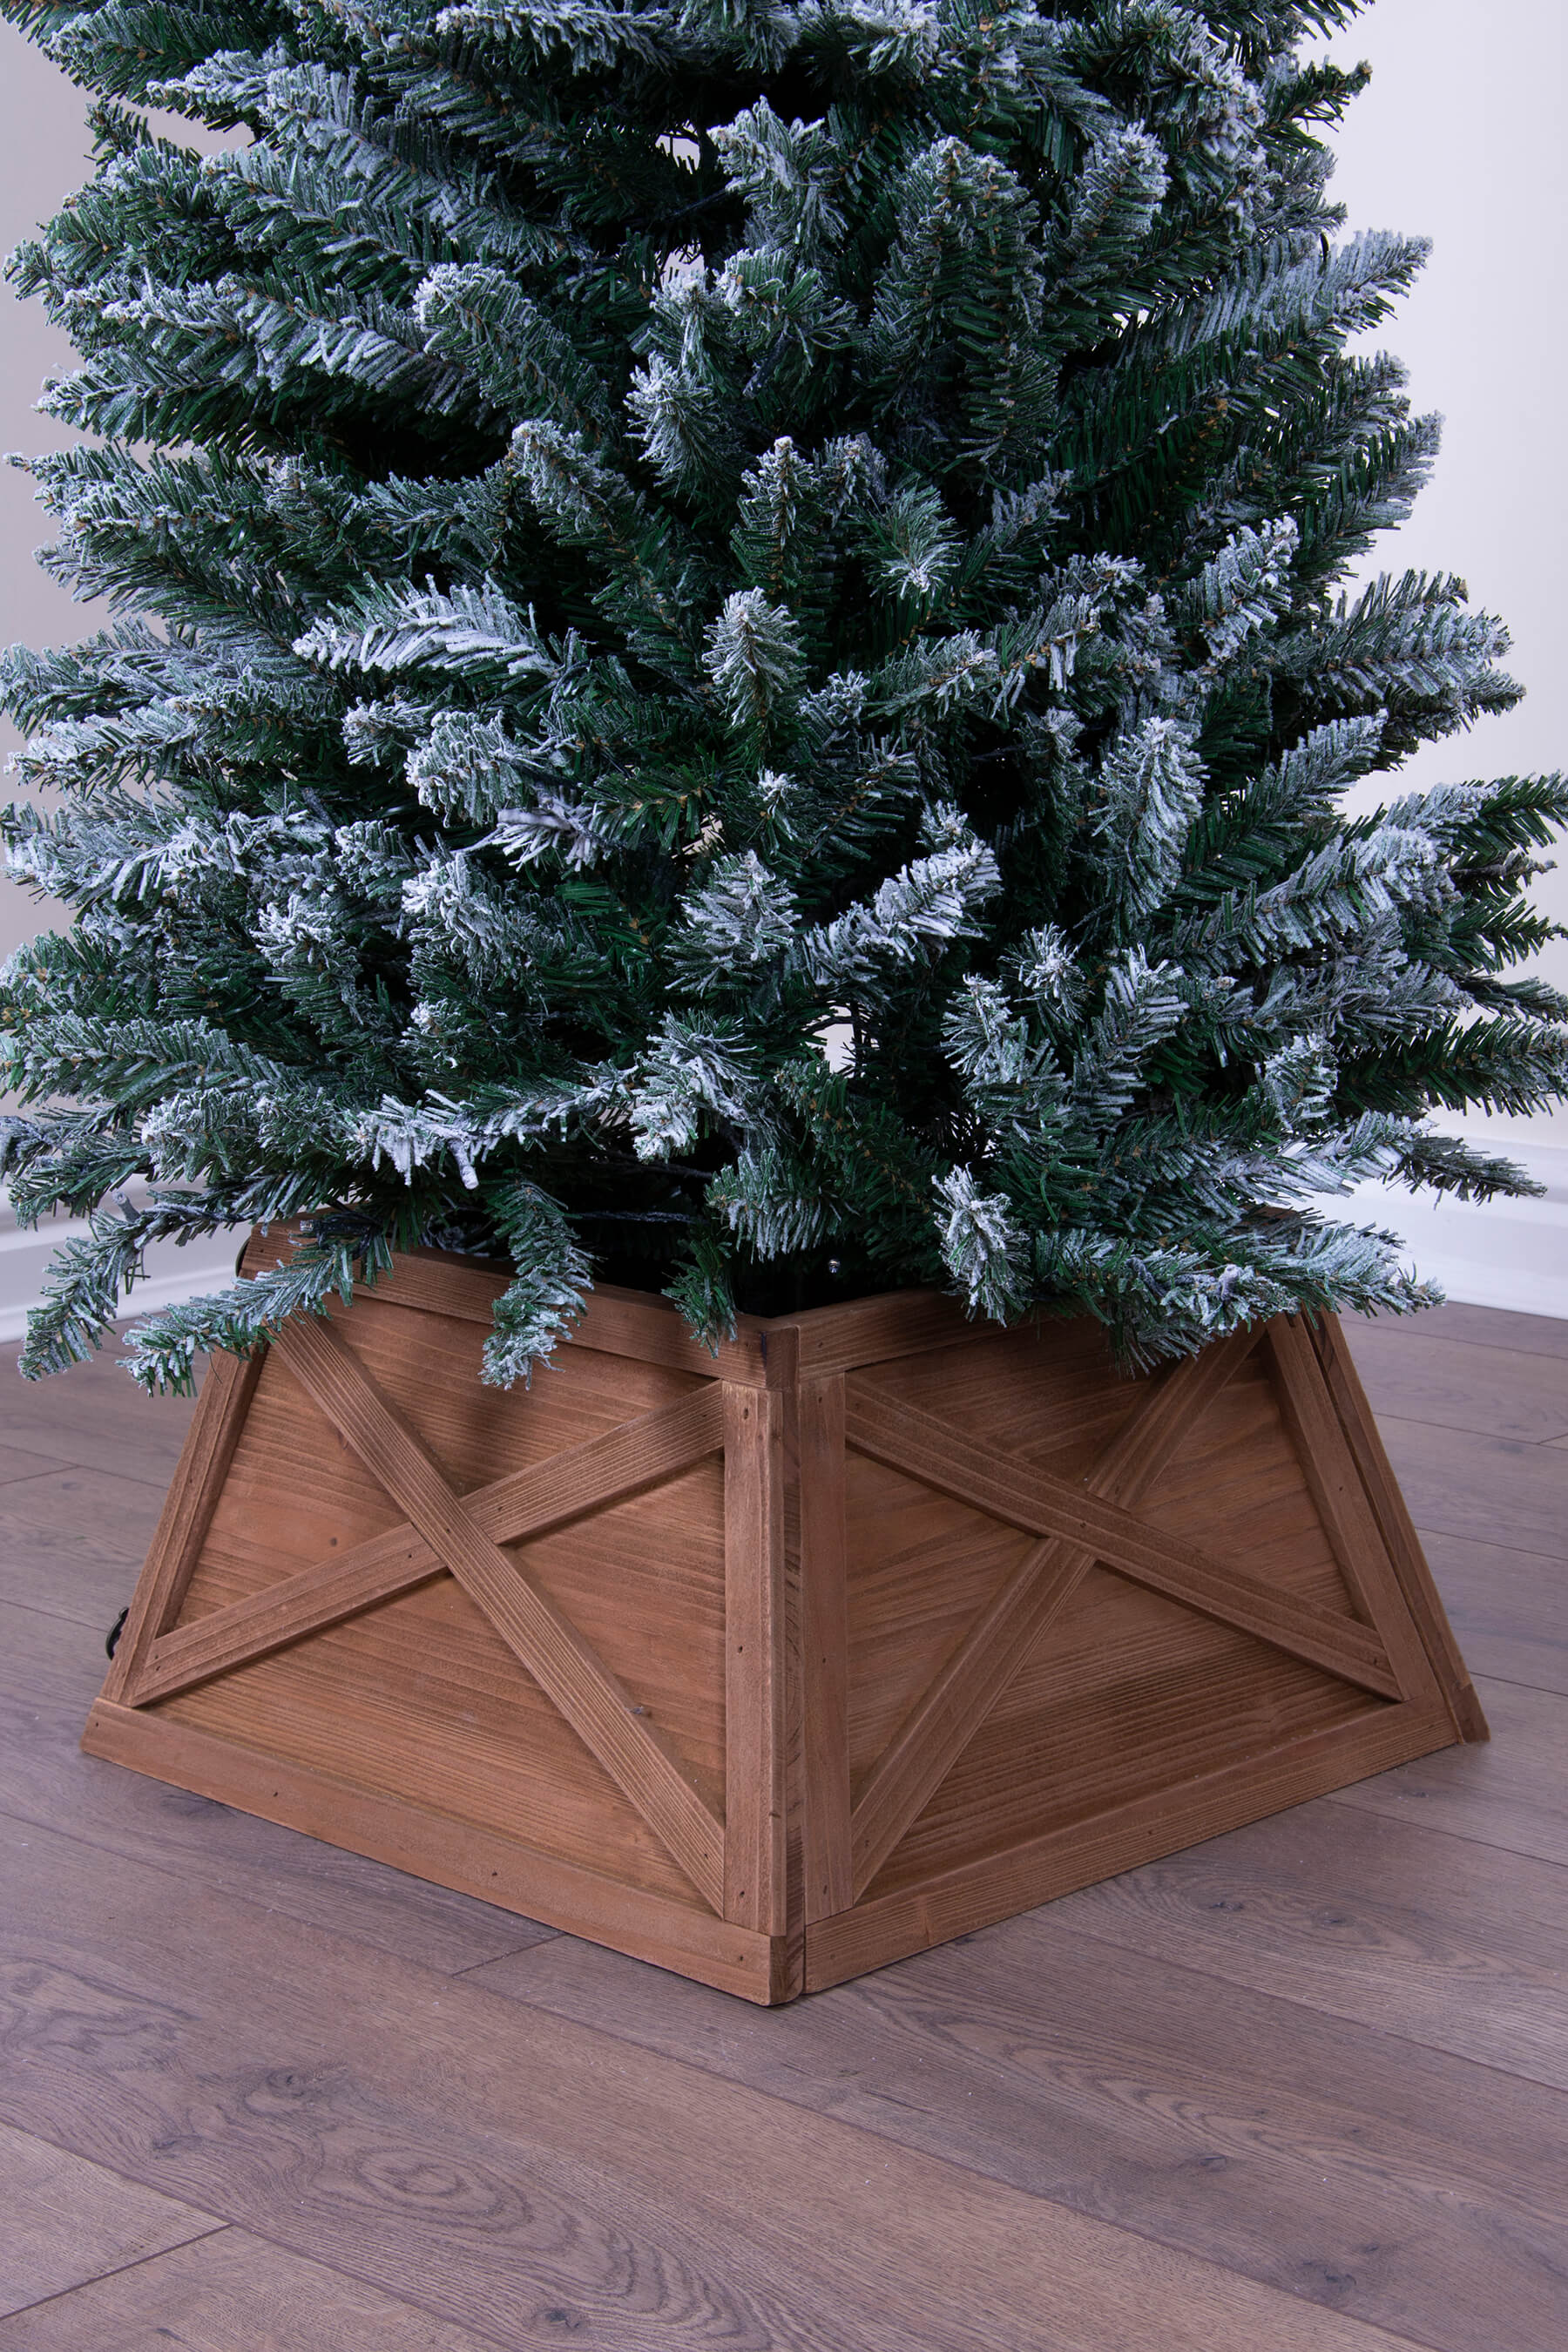 Buy Small Wooden Christmas Tree Skirts Online